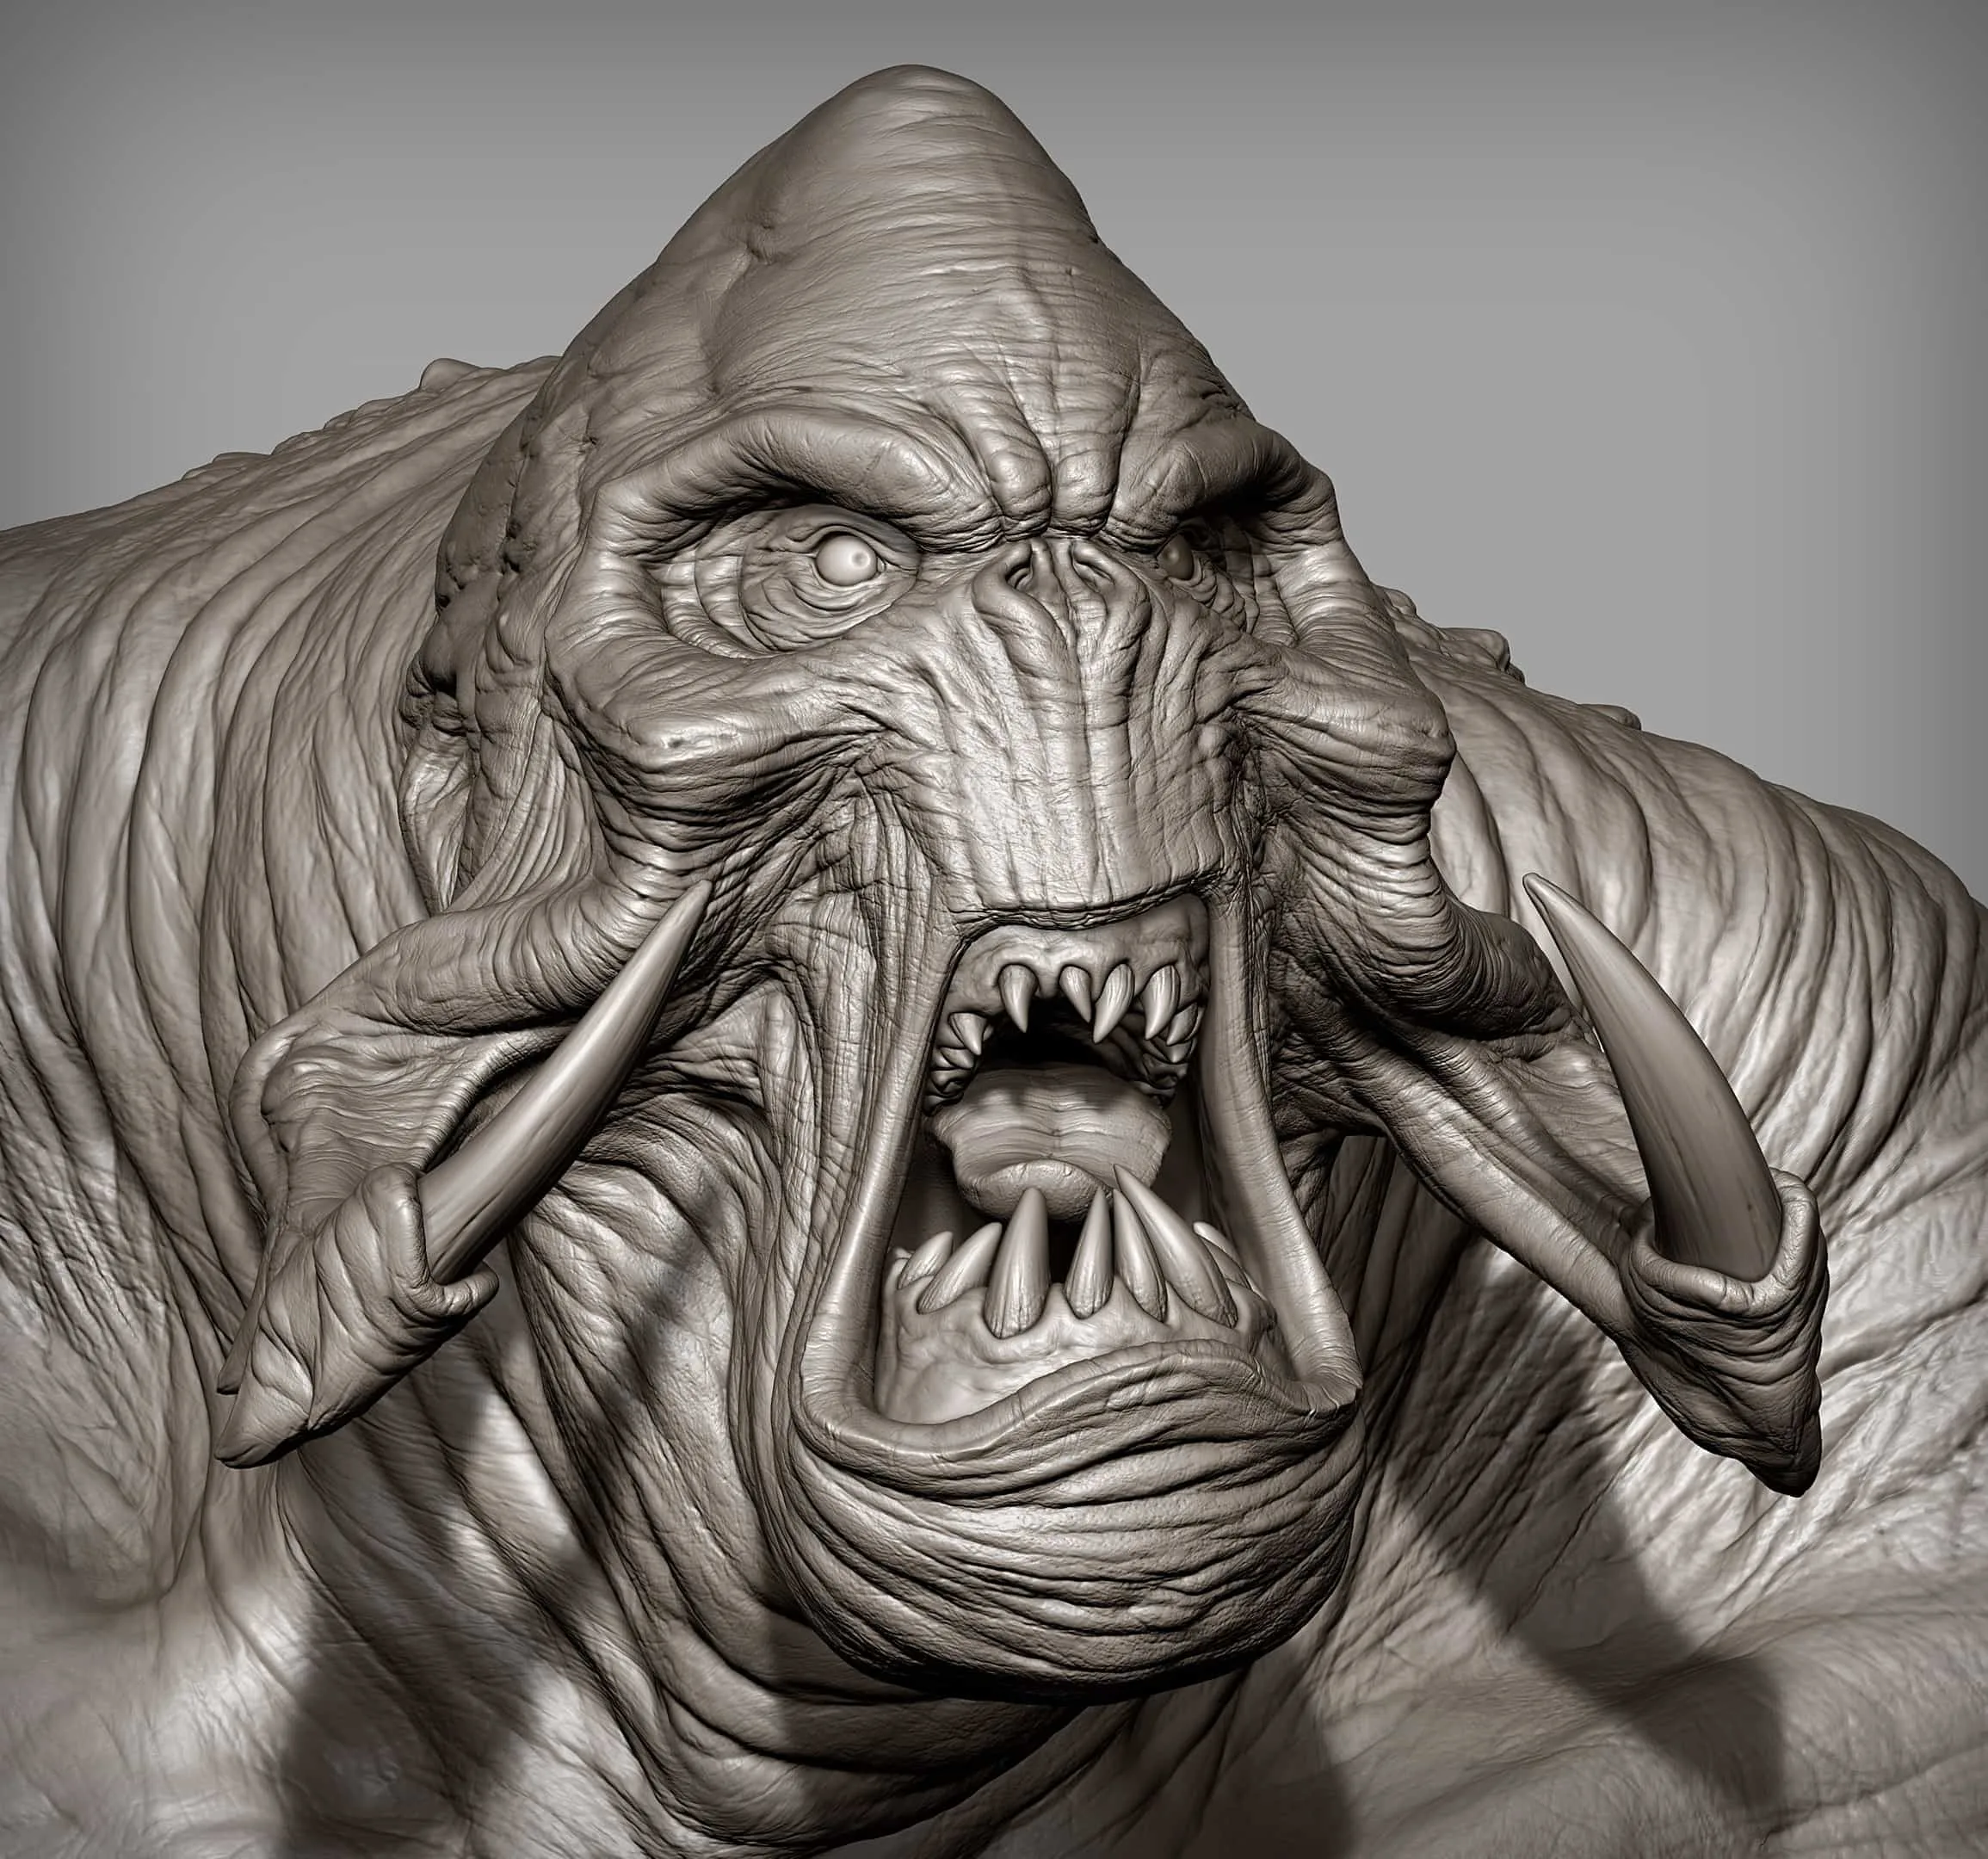 Sculpting Characters from Concepts - a ZBrush Workshop